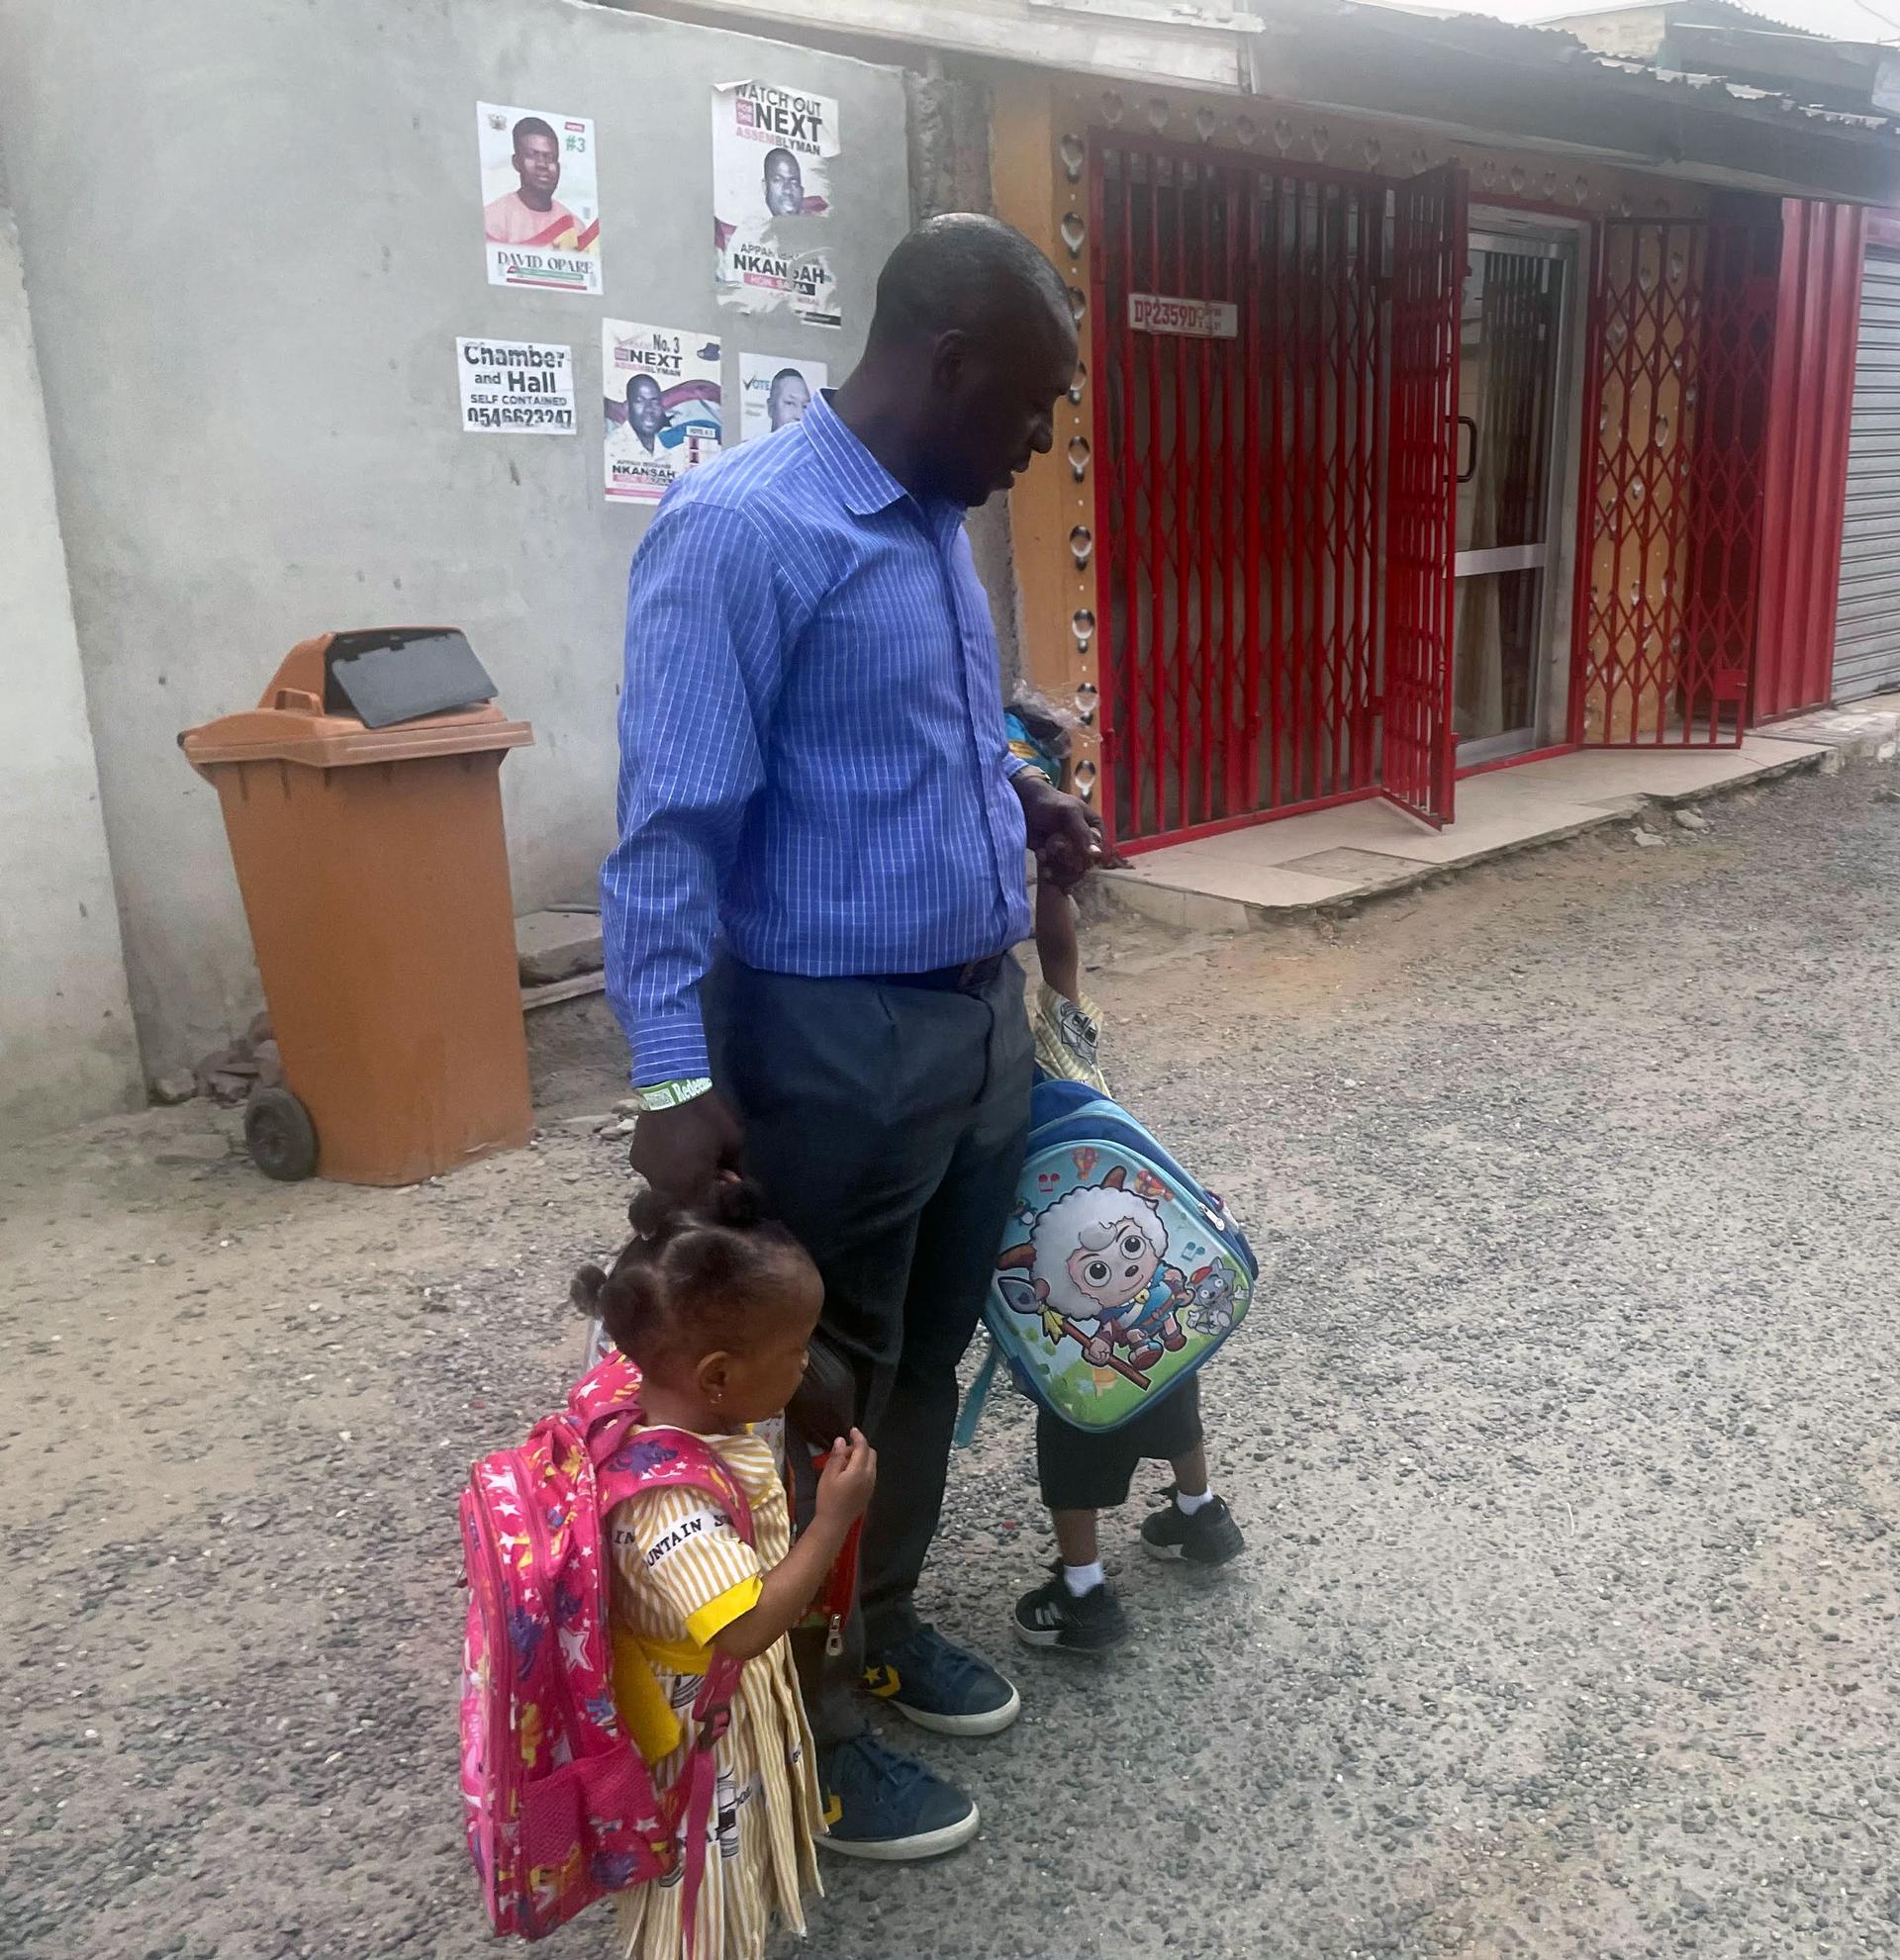 Emmanuel Osei Waziri is dropping off his children at school. He said he’s concerned about Accra’s worsening air quality.